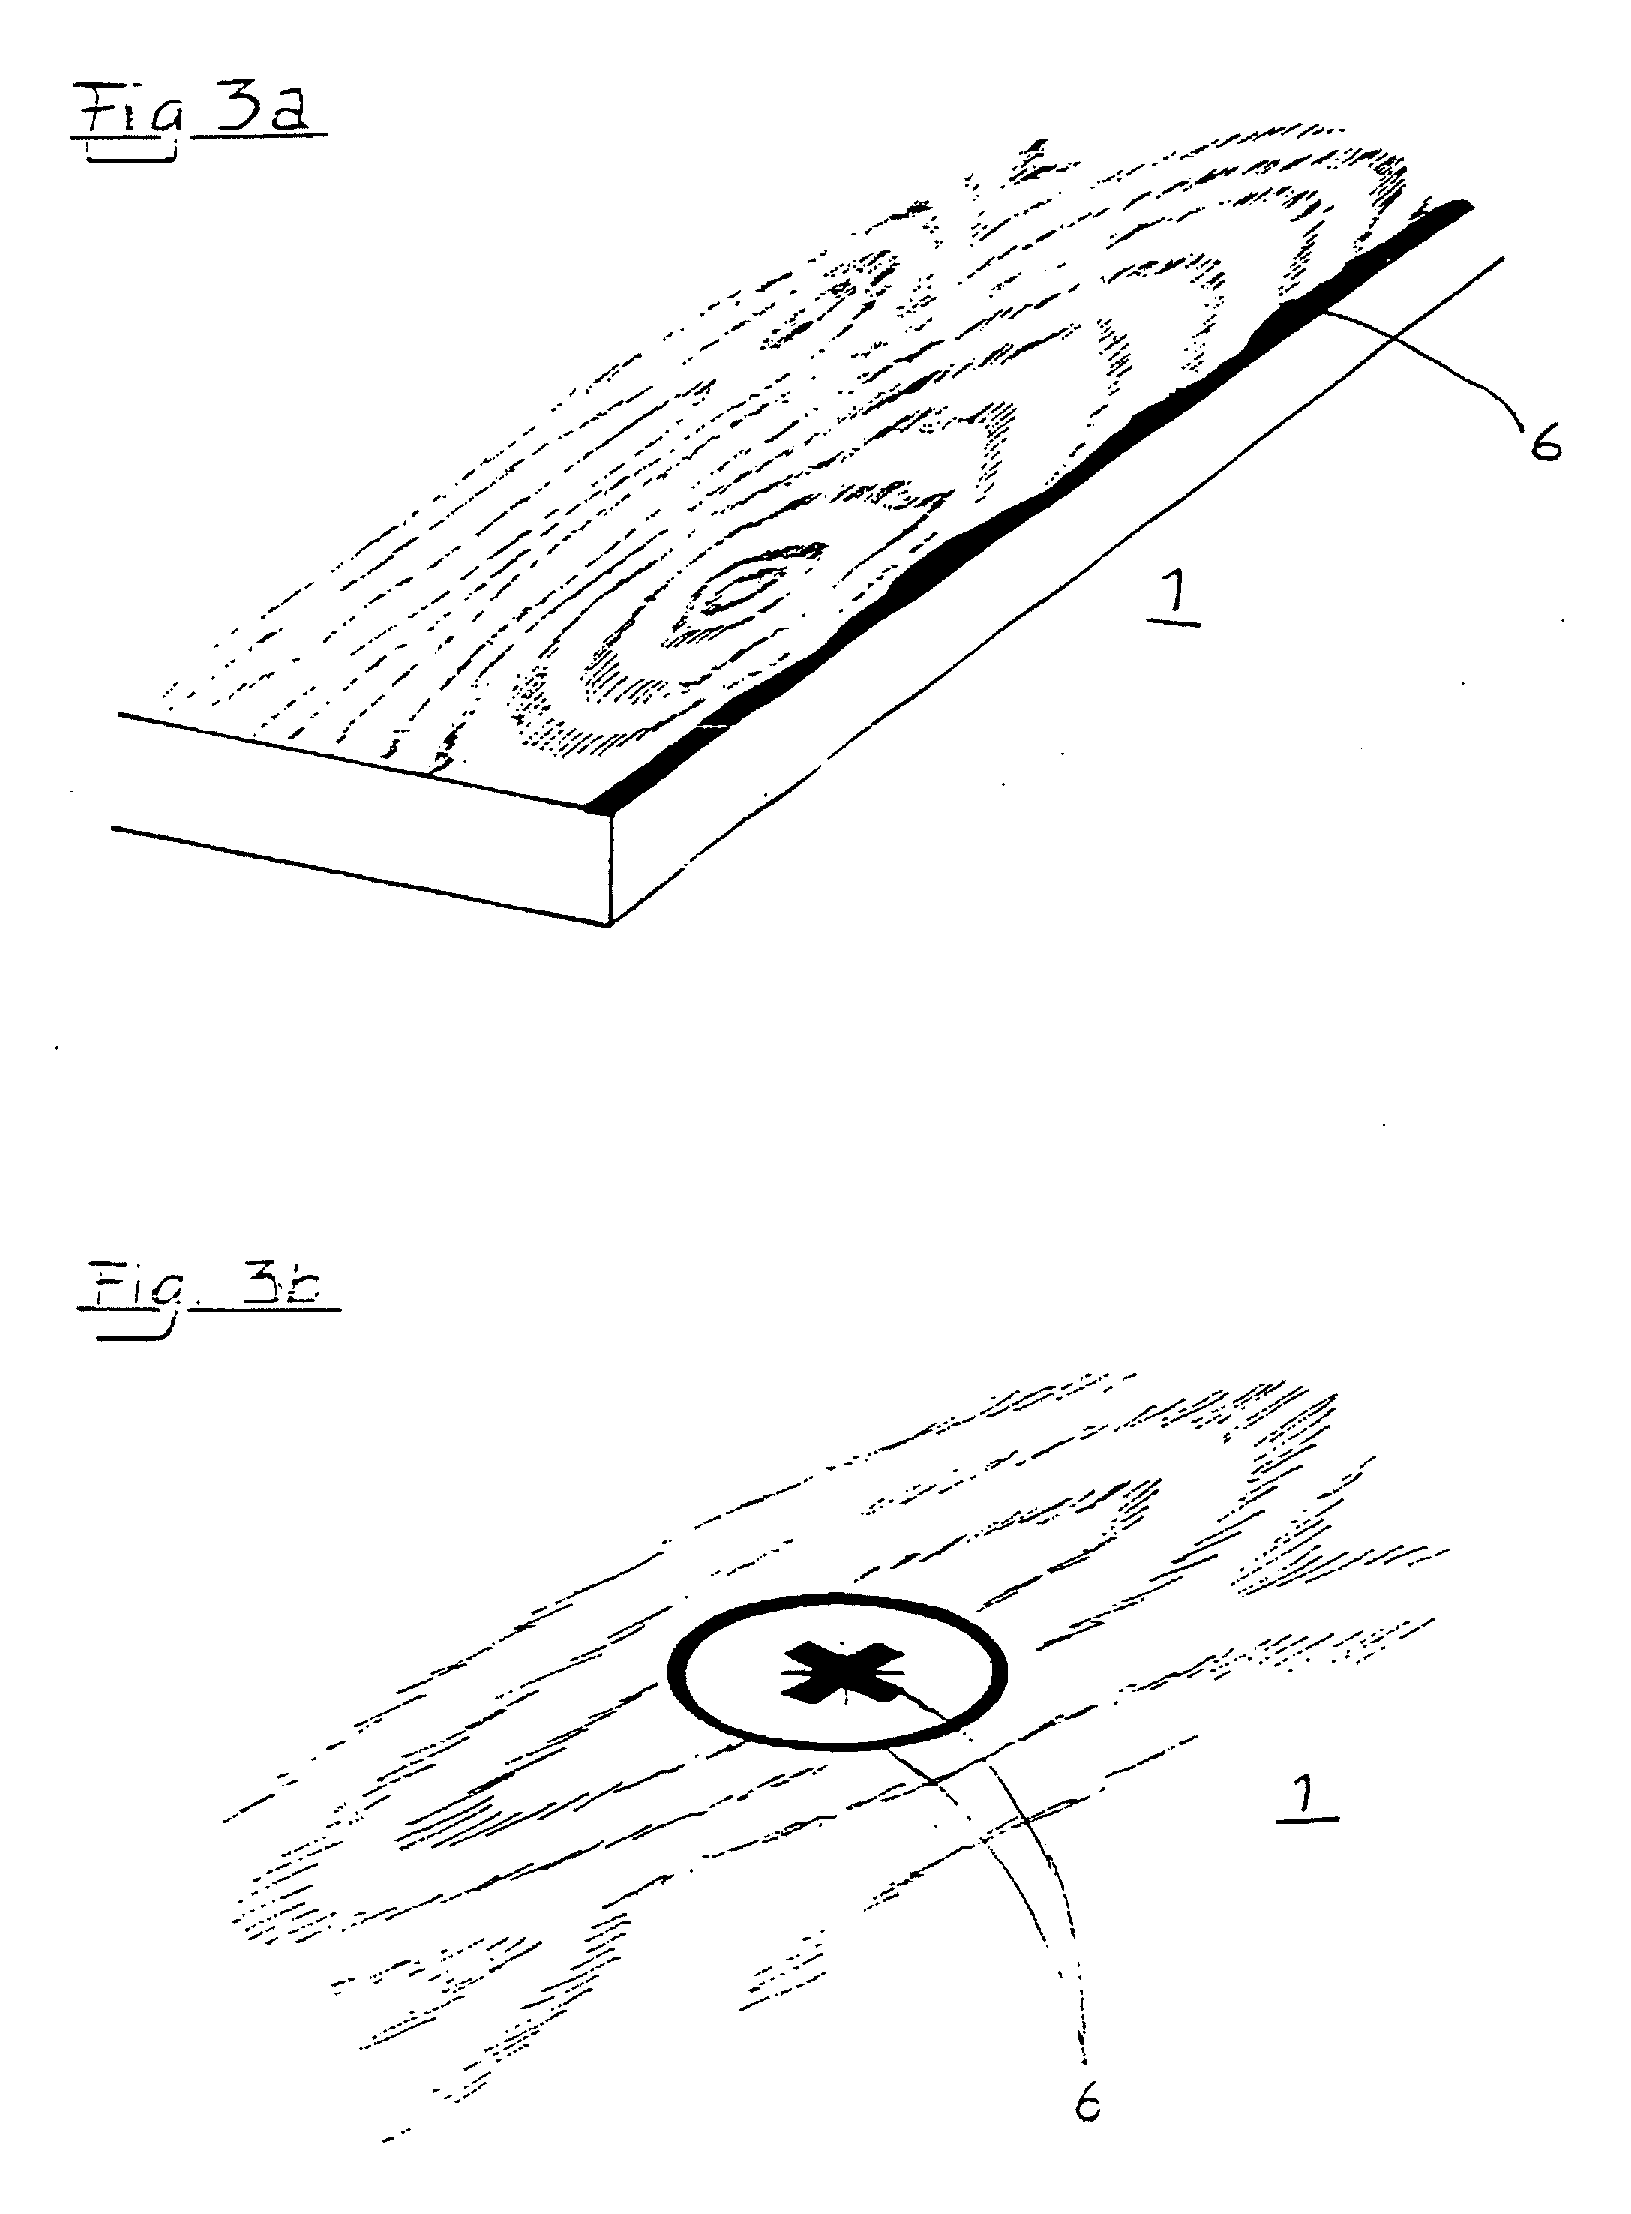 Decorative laminate board and related methods